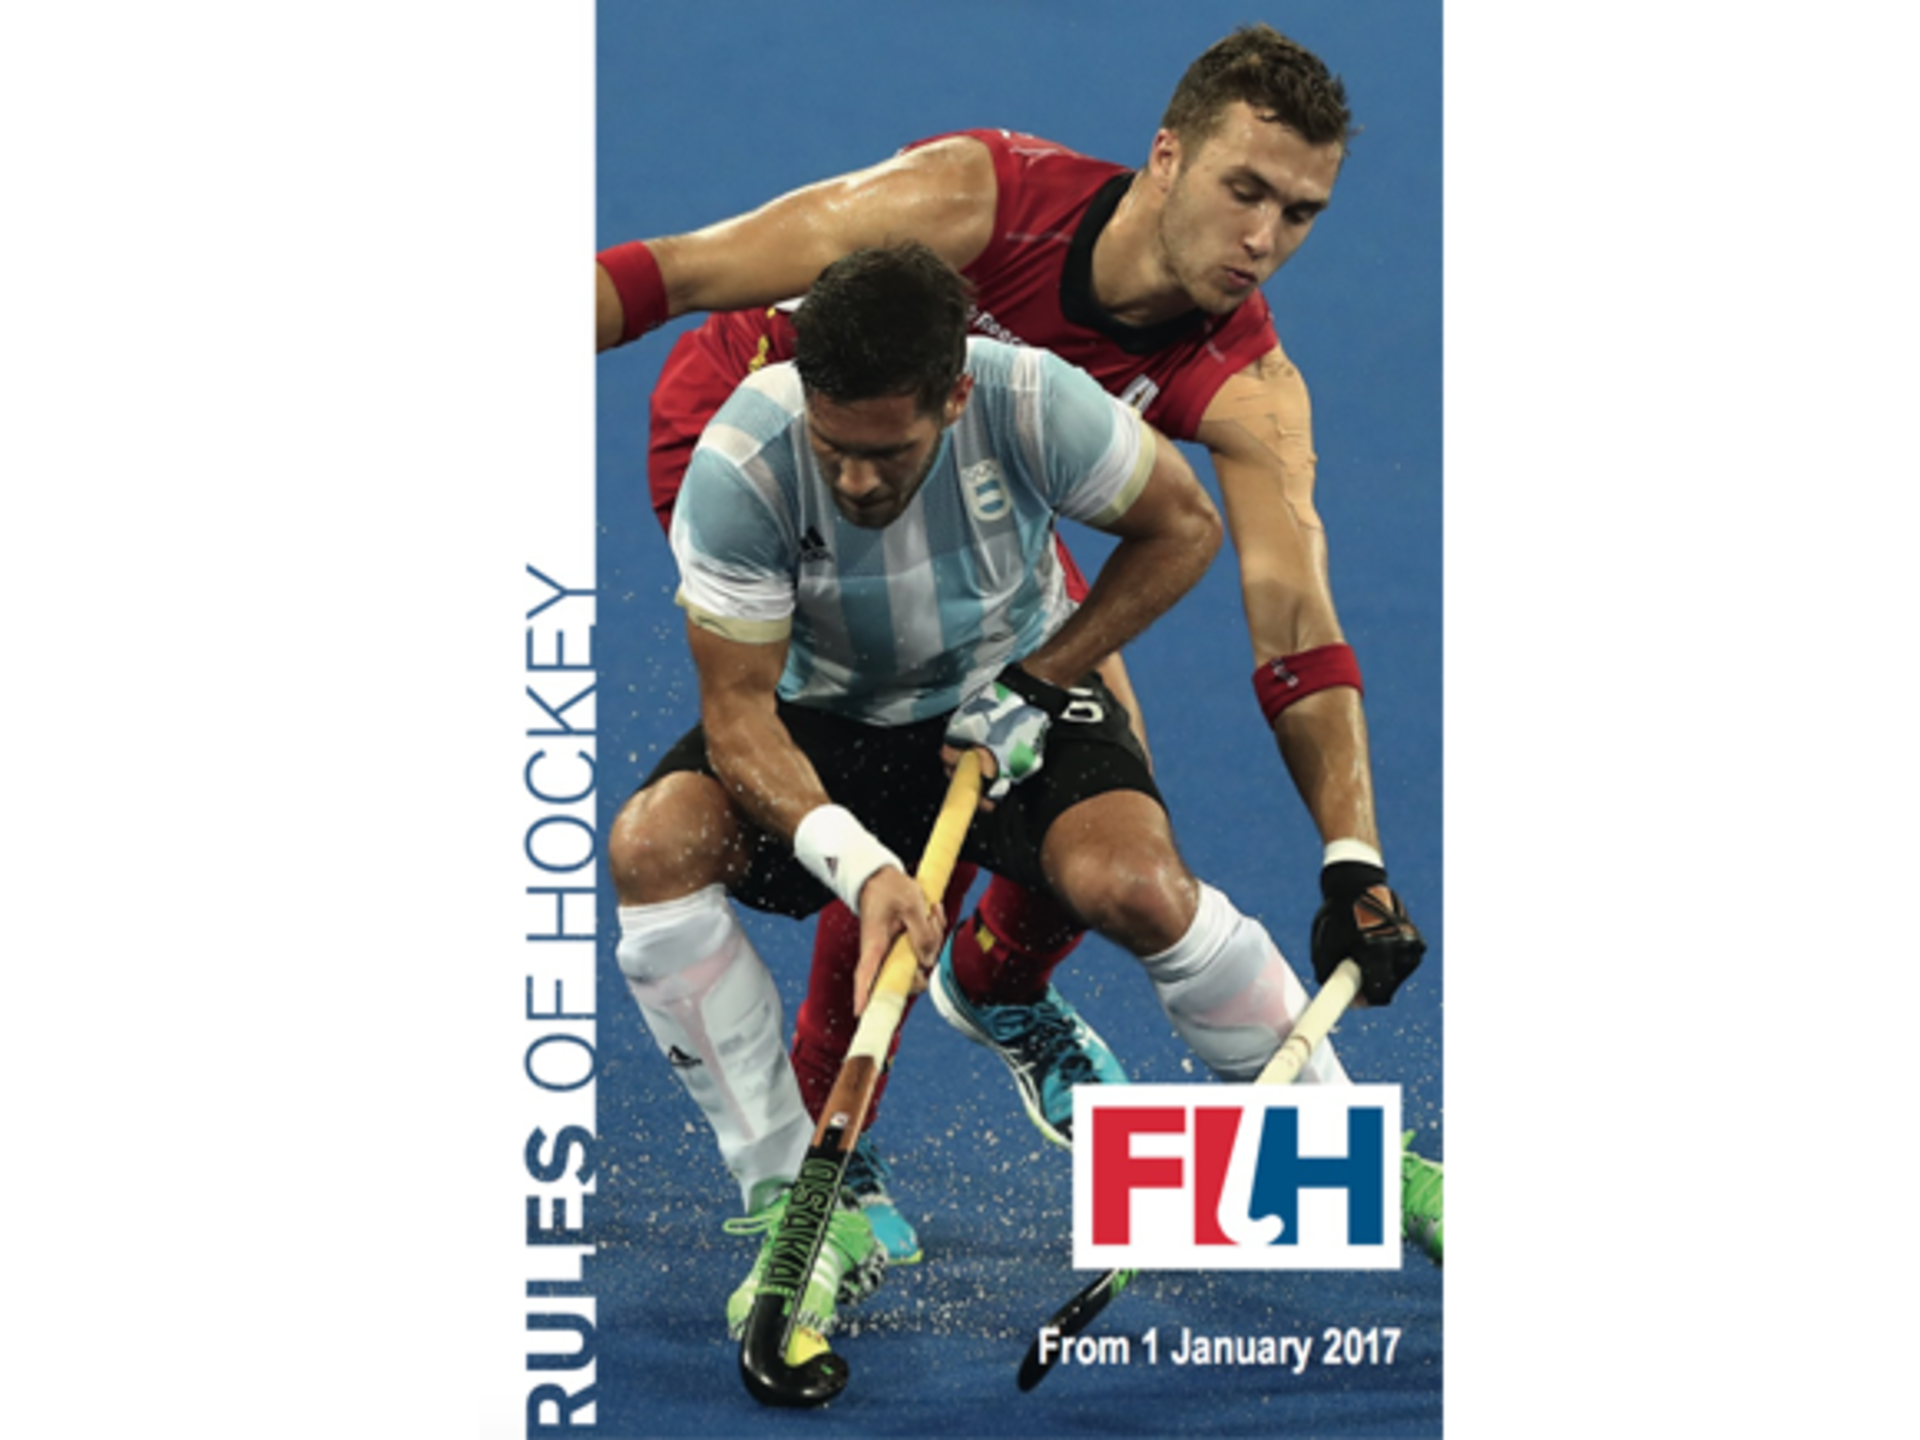 New Substitution Rule for Goalkeepers Adopted for Field Hockey